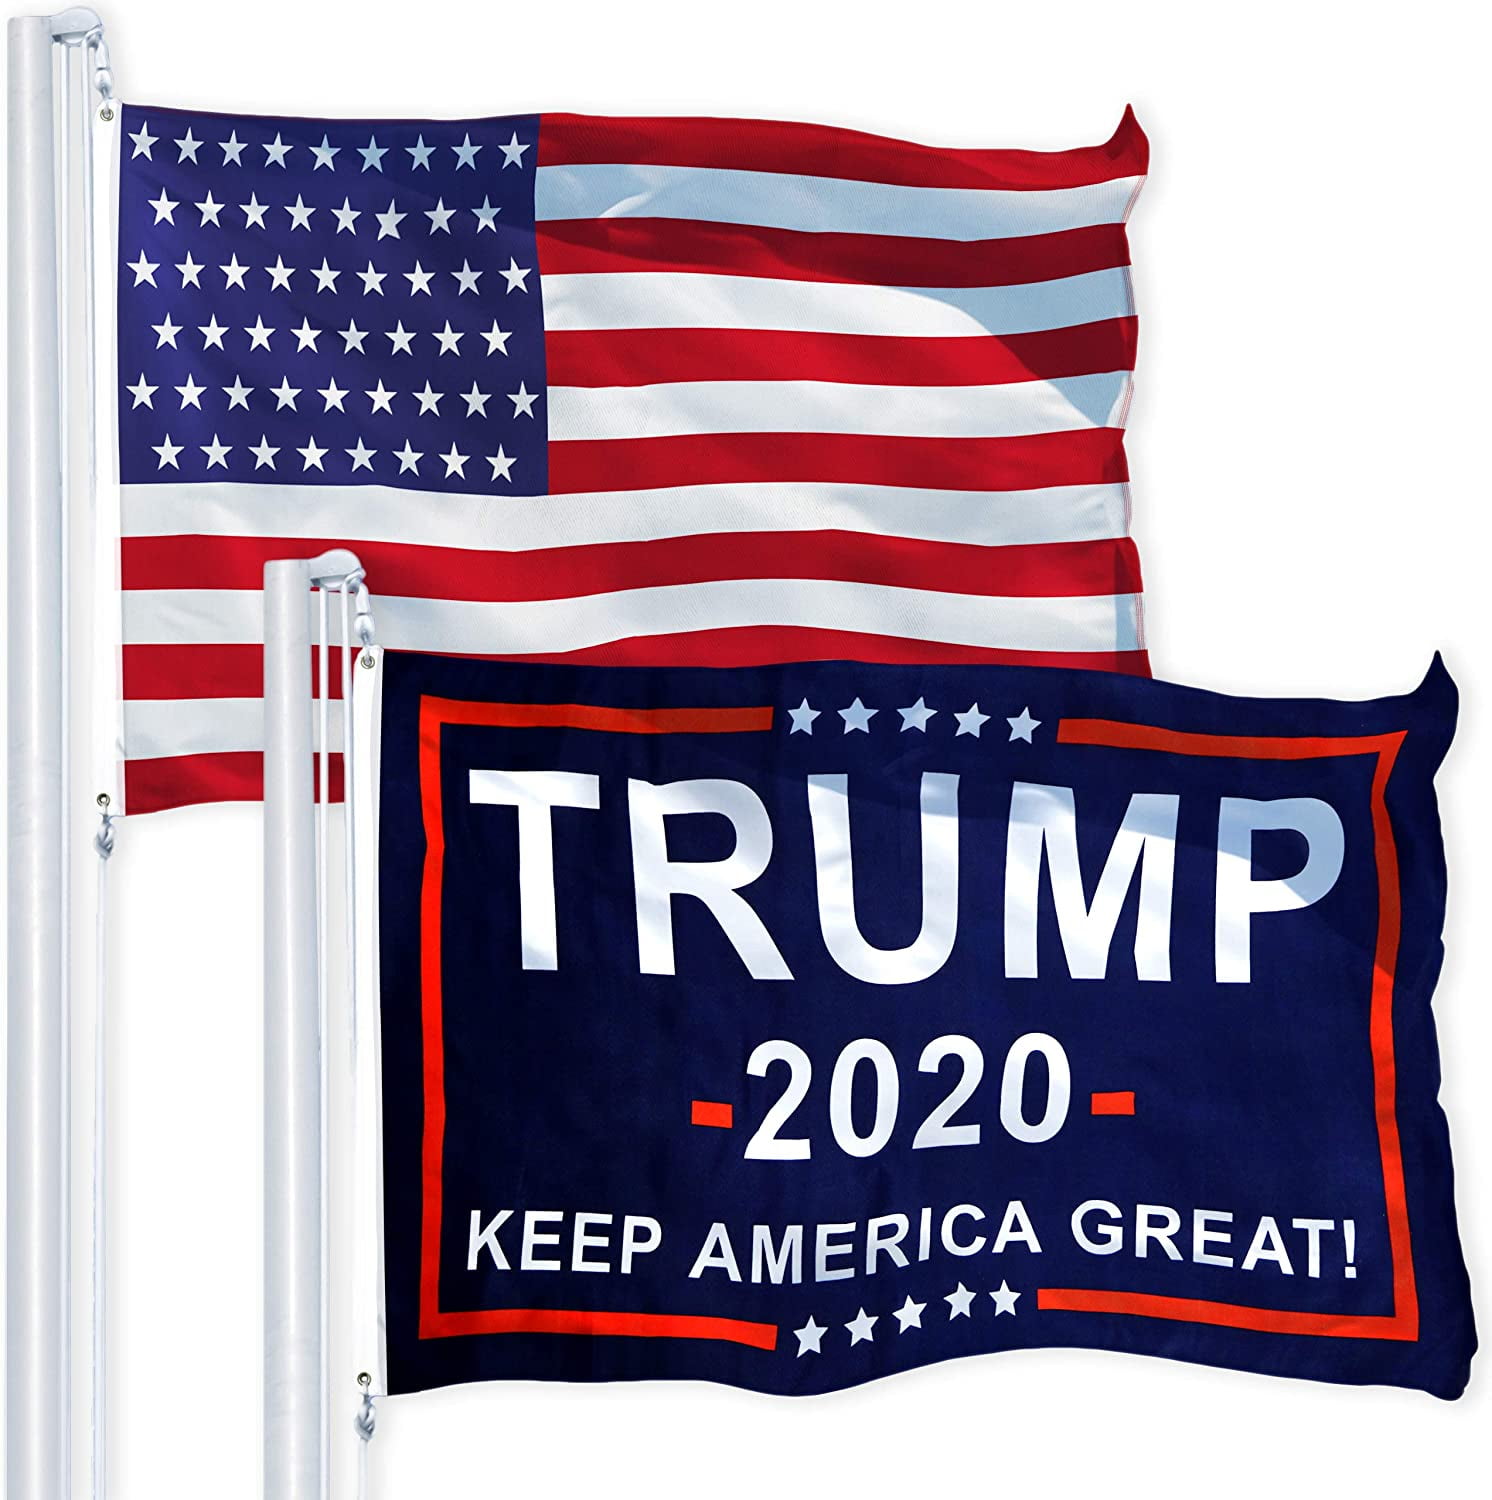 Re-Elect DONALD TRUMP 2020 Keep America First FLAG 3x5 FT 150D NYLON Grommets 